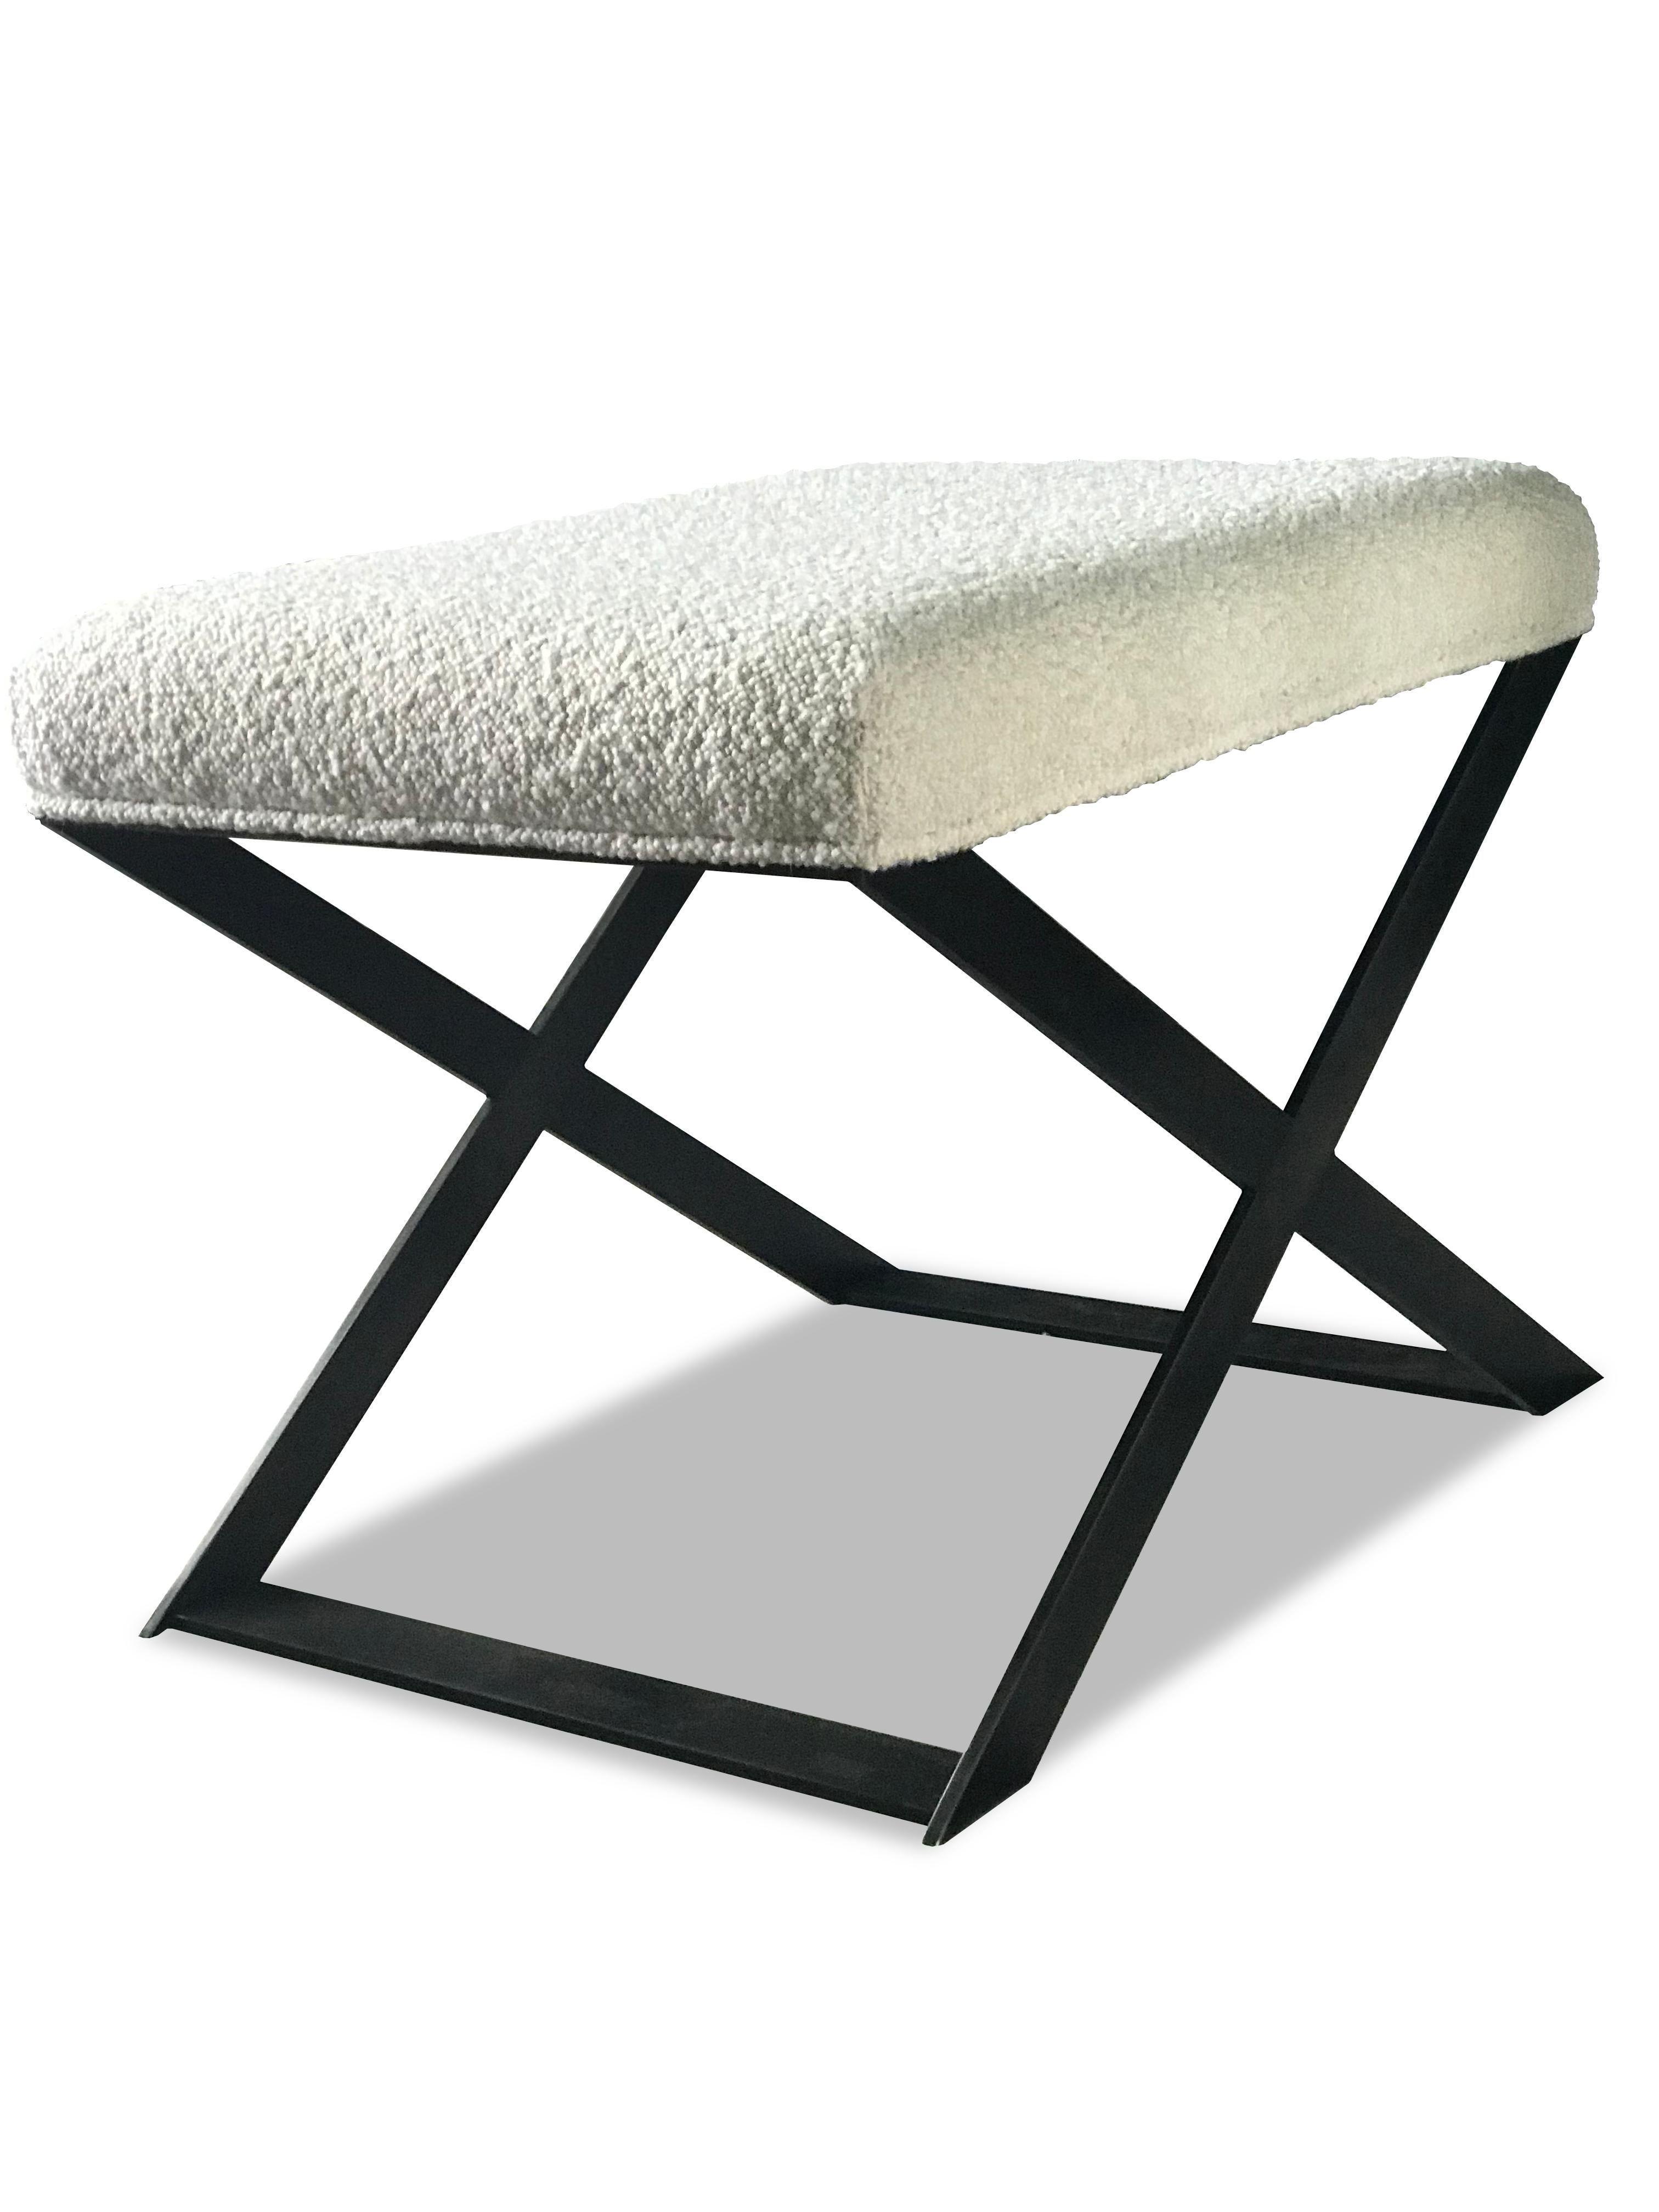 Its shape radiates dominance while its aesthetic harmonises with Casa Botelho’s signature style, Masculine Glamour. The X-leg stool will complement a variety of spaces from the bedroom to the living room, with its distinctive combination of hard and